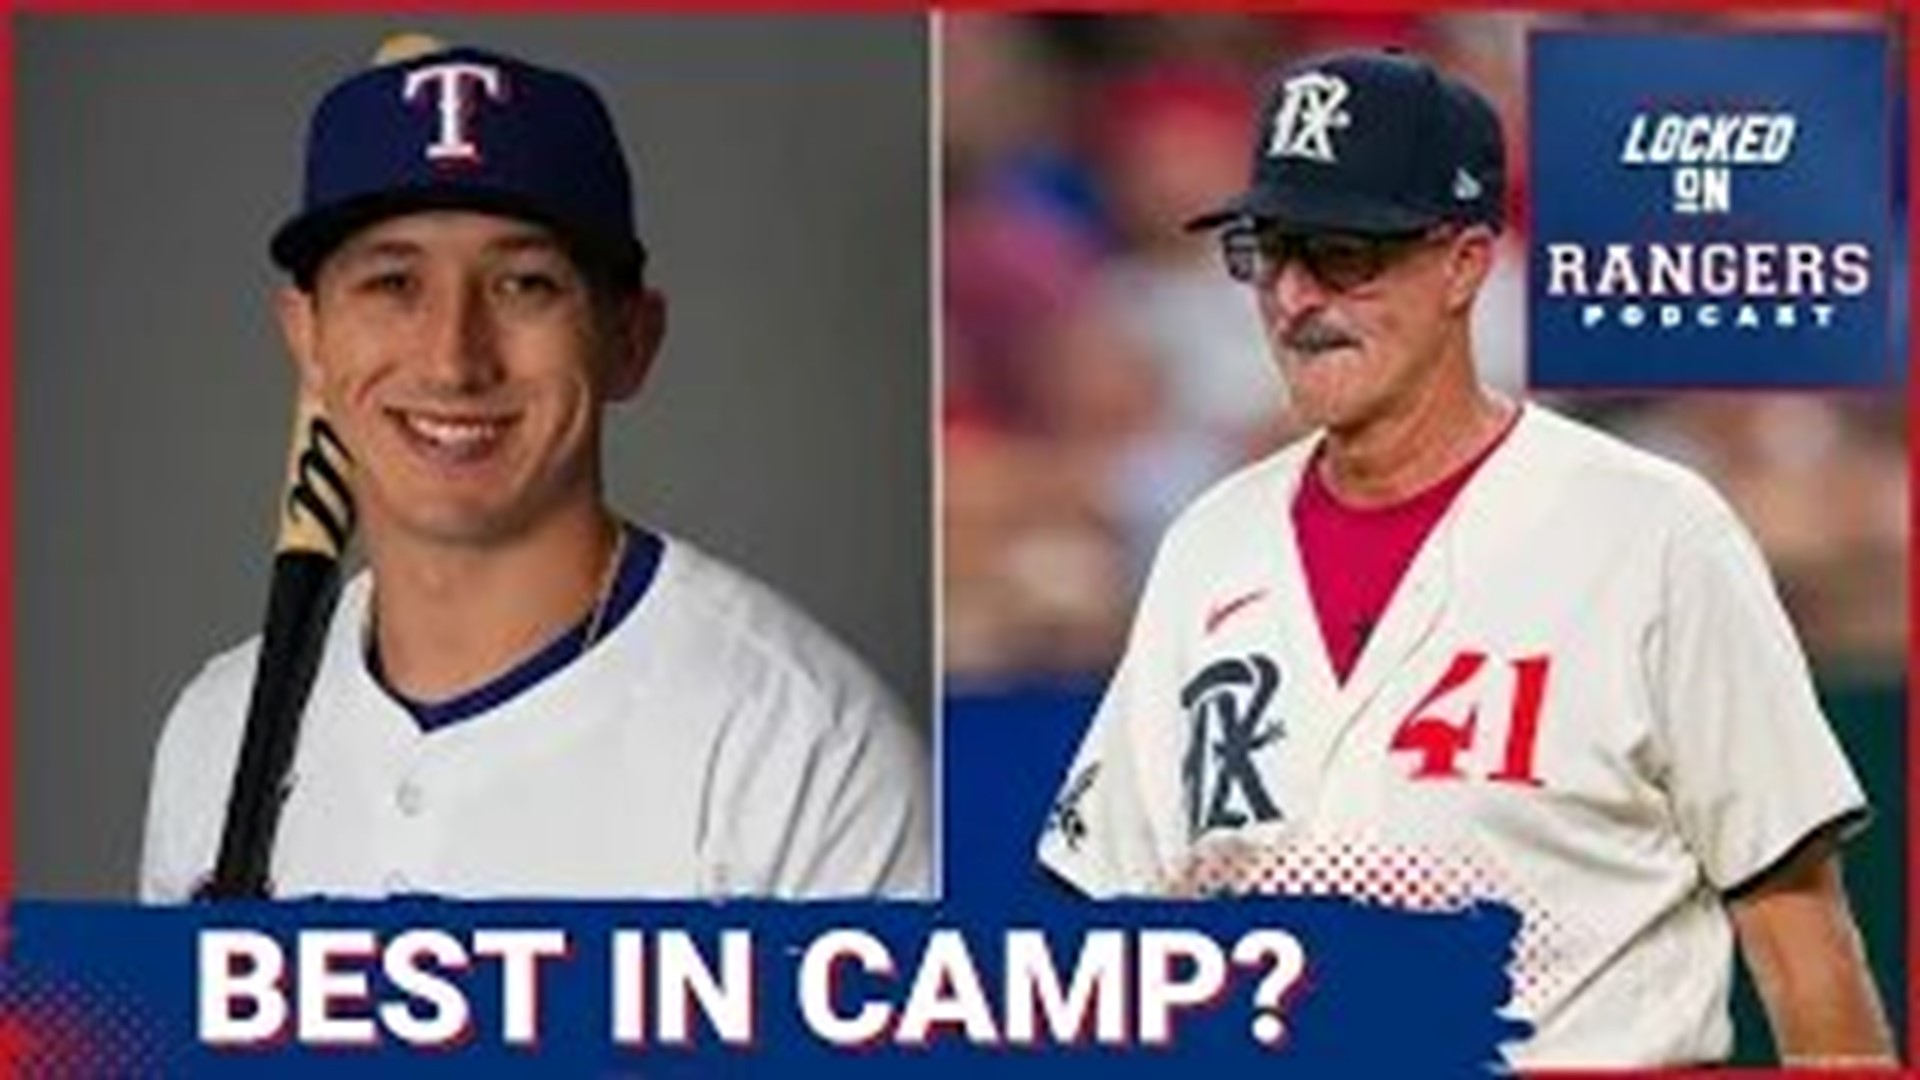 Texas Rangers top prospect Wyatt Langford earned high praise from pitching coach Mike Maddux after a week of spring training.